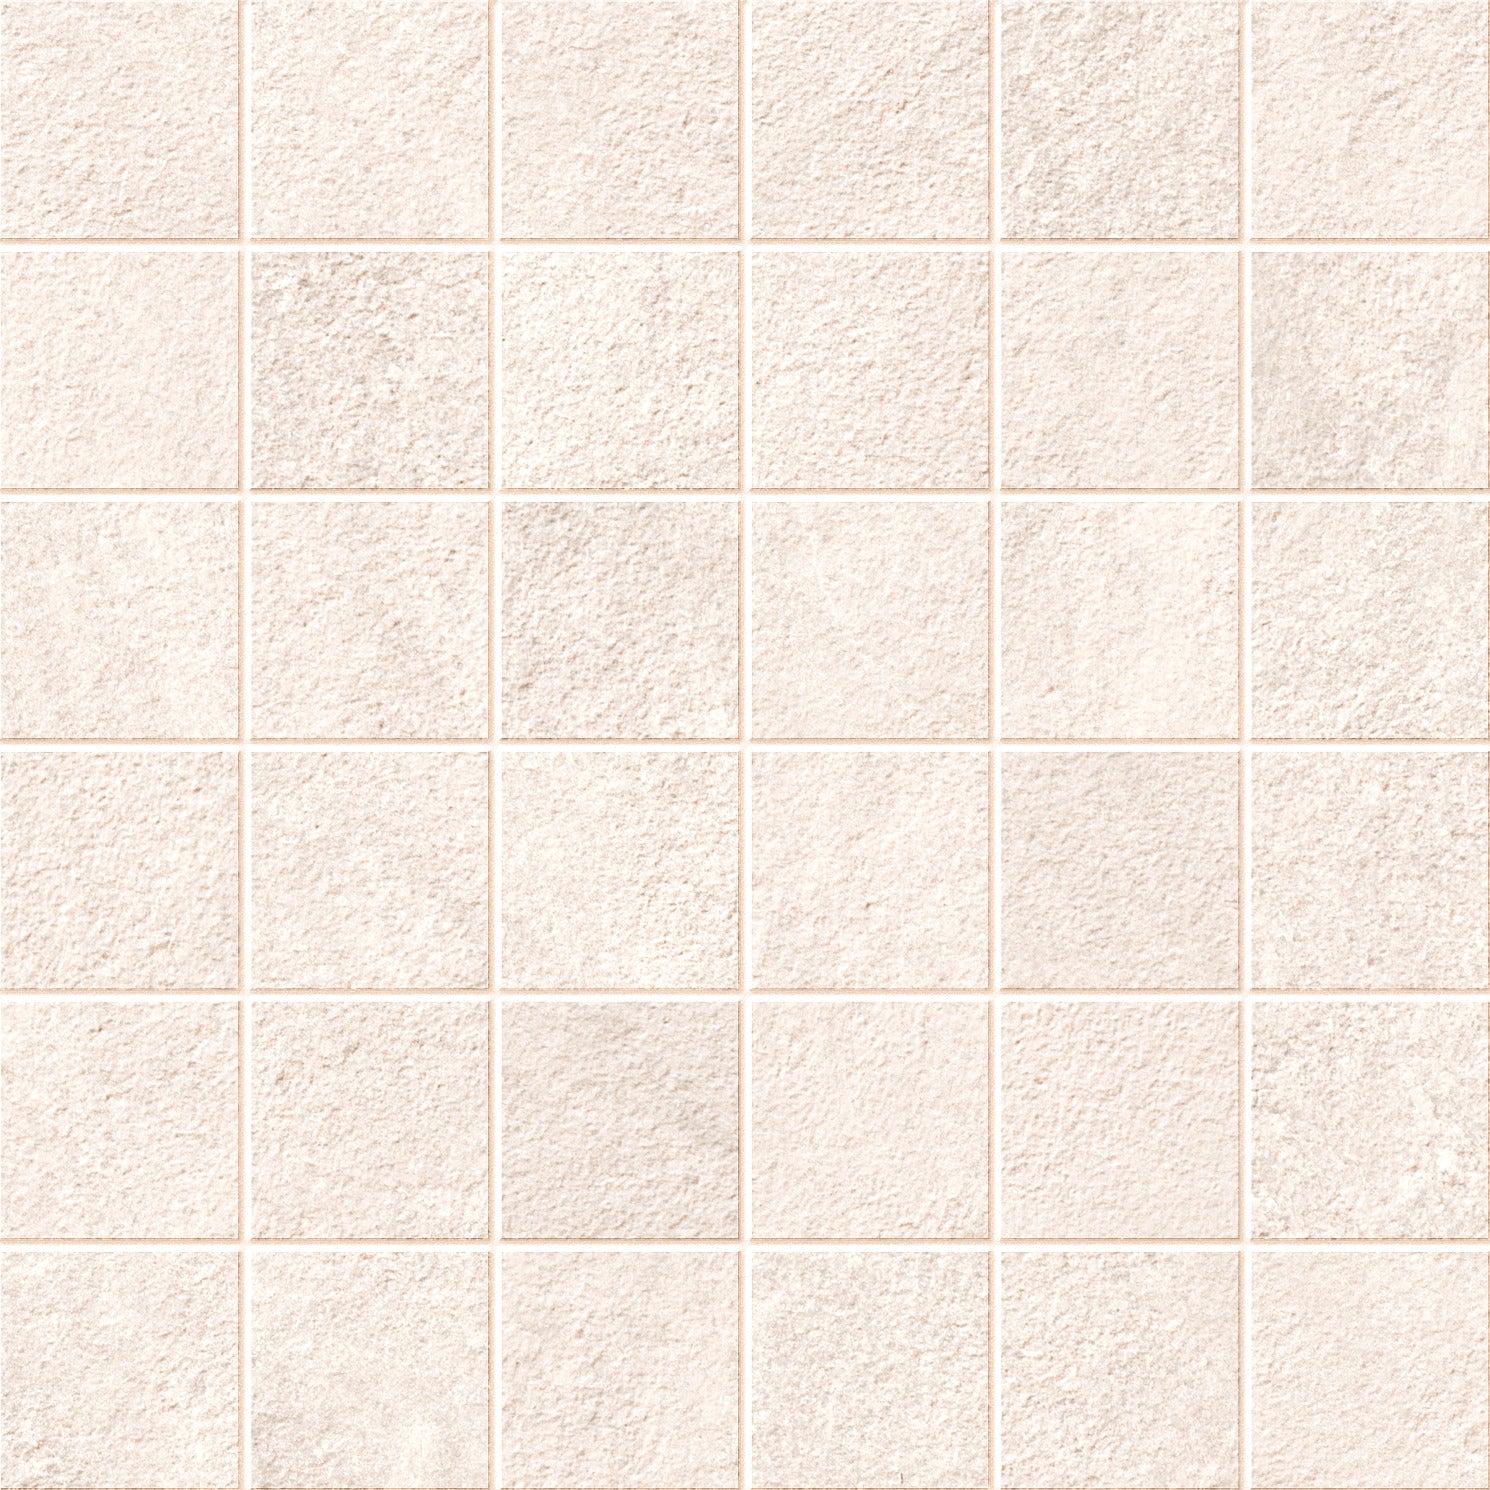 landmark 9mm explore african beige straight stack 2x2 mosaic 12x12x9mm matte rectified porcelain tile distributed by surface group international